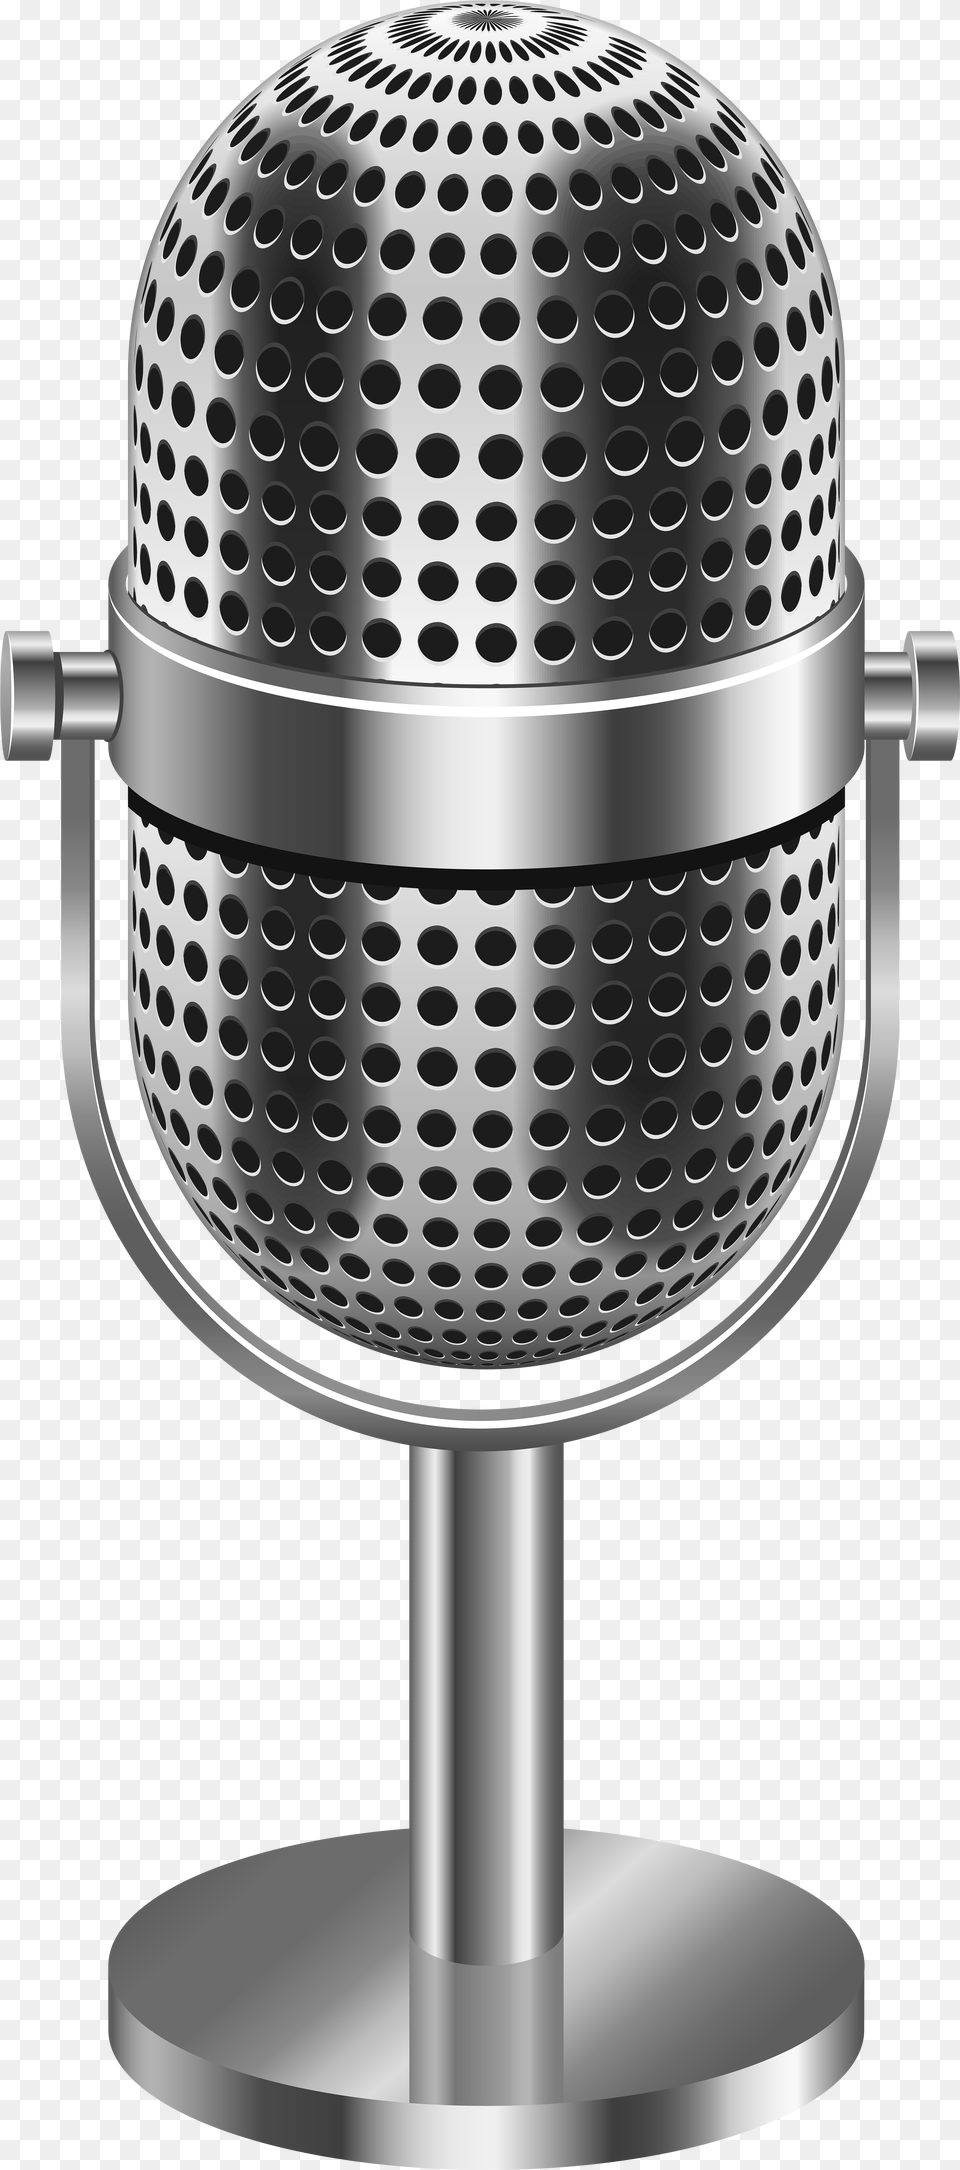 Microfono Vector, Electrical Device, Microphone, Bottle, Shaker Png